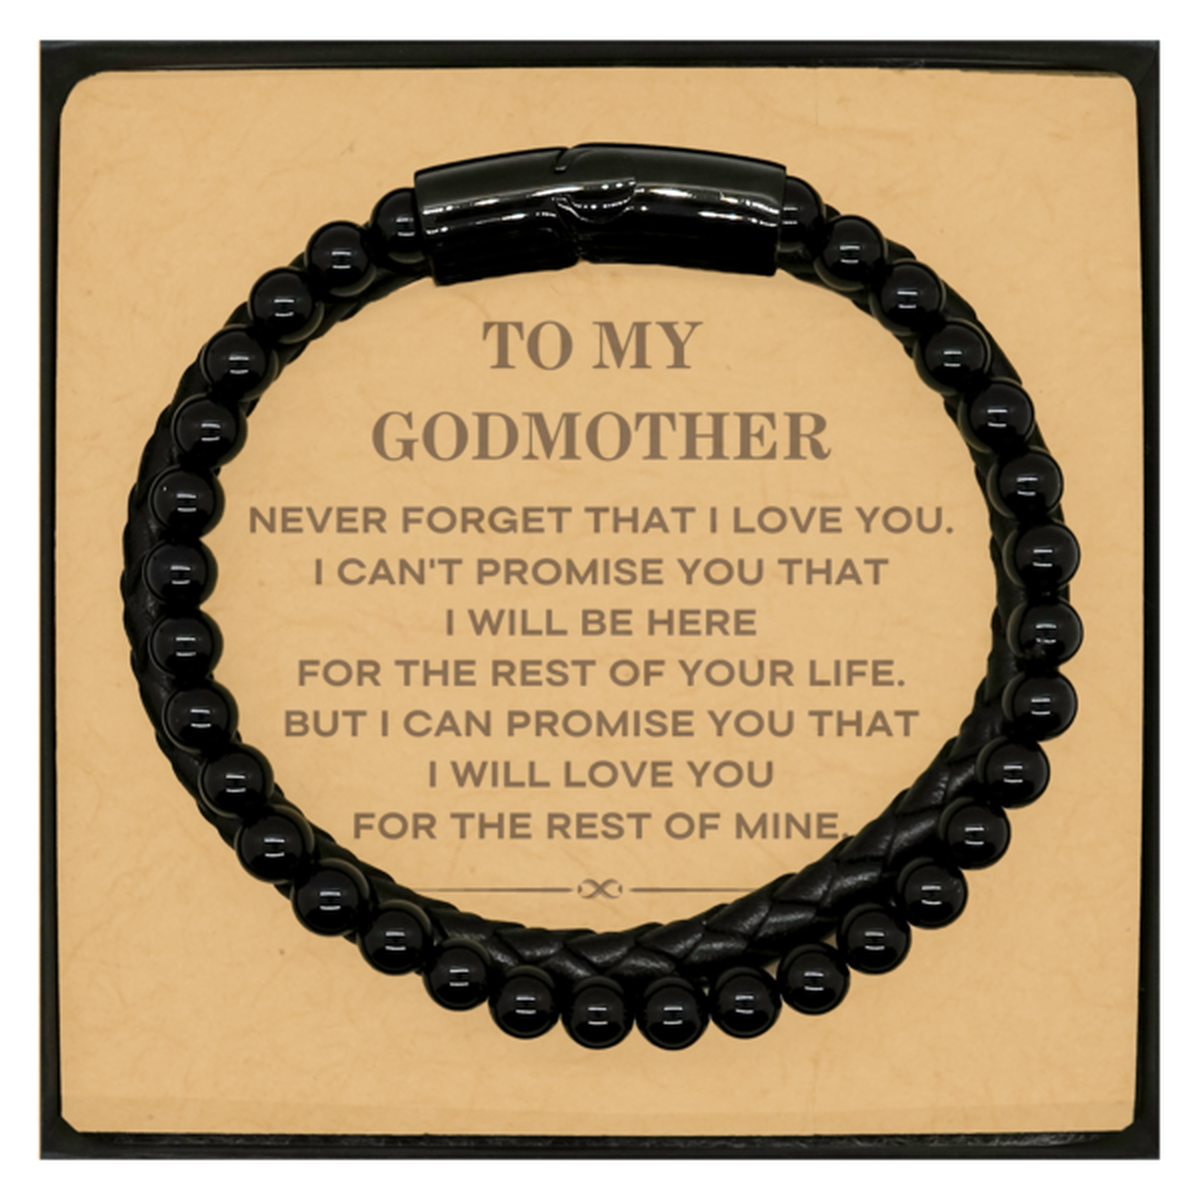 To My Godmother Gifts, I will love you for the rest of mine, Love Godmother Bracelet, Birthday Christmas Unique Stone Leather Bracelets For Godmother